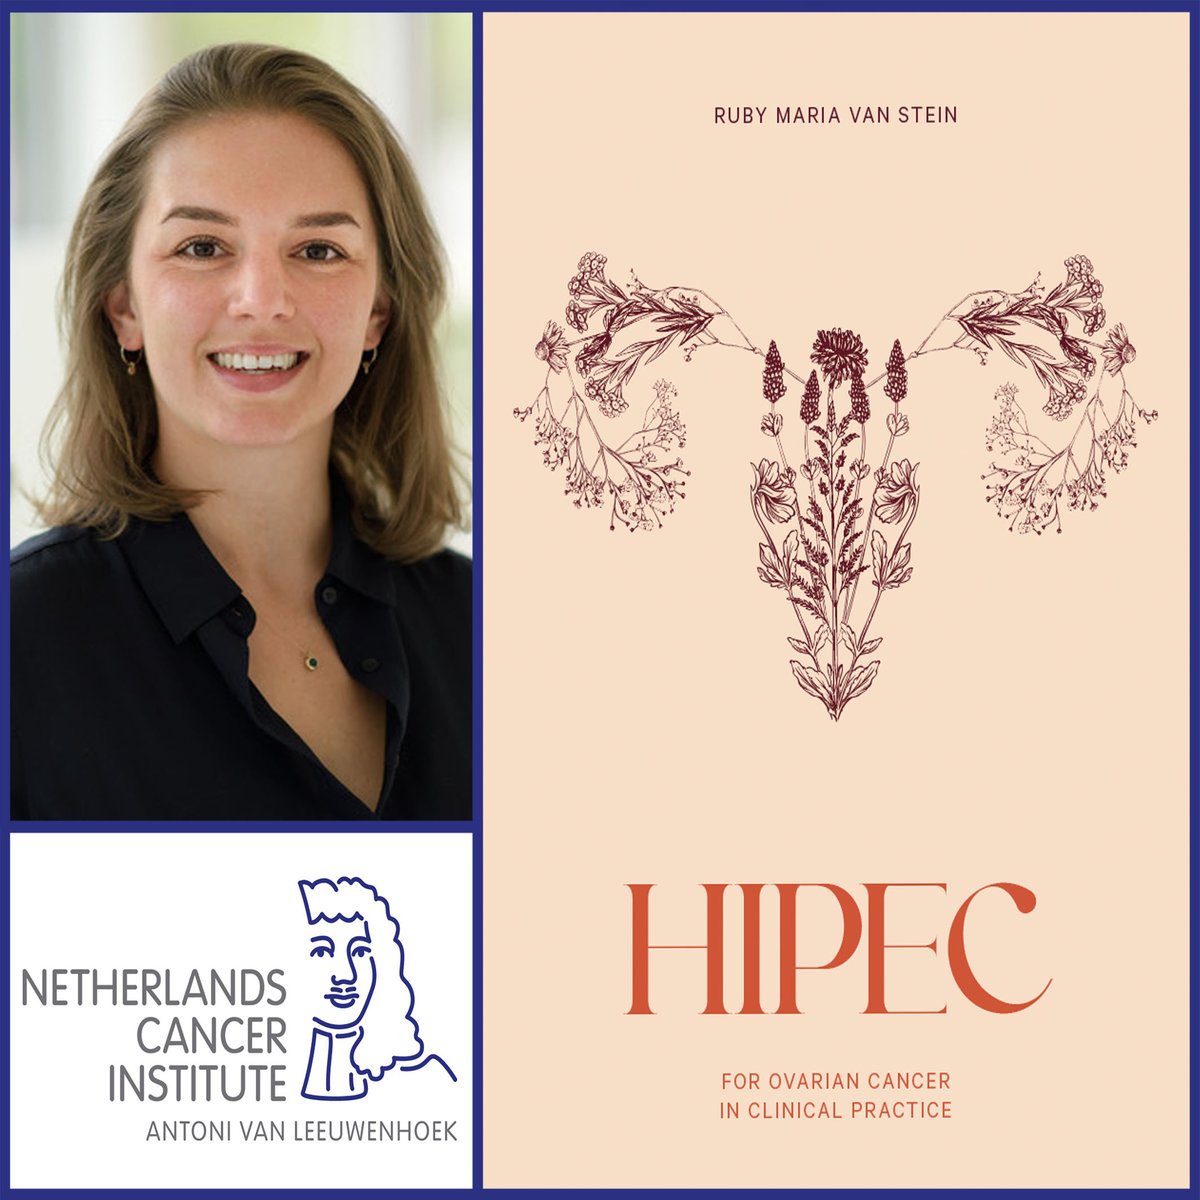 Thanks to the efforts of PhD candidate Ruby van Stein @hetAVL @UvA_Amsterdam, the HIPEC treatment and comprehensive information about it are now available to all ovarian cancer patients. ➡️ bit.ly/3VP9PnQ